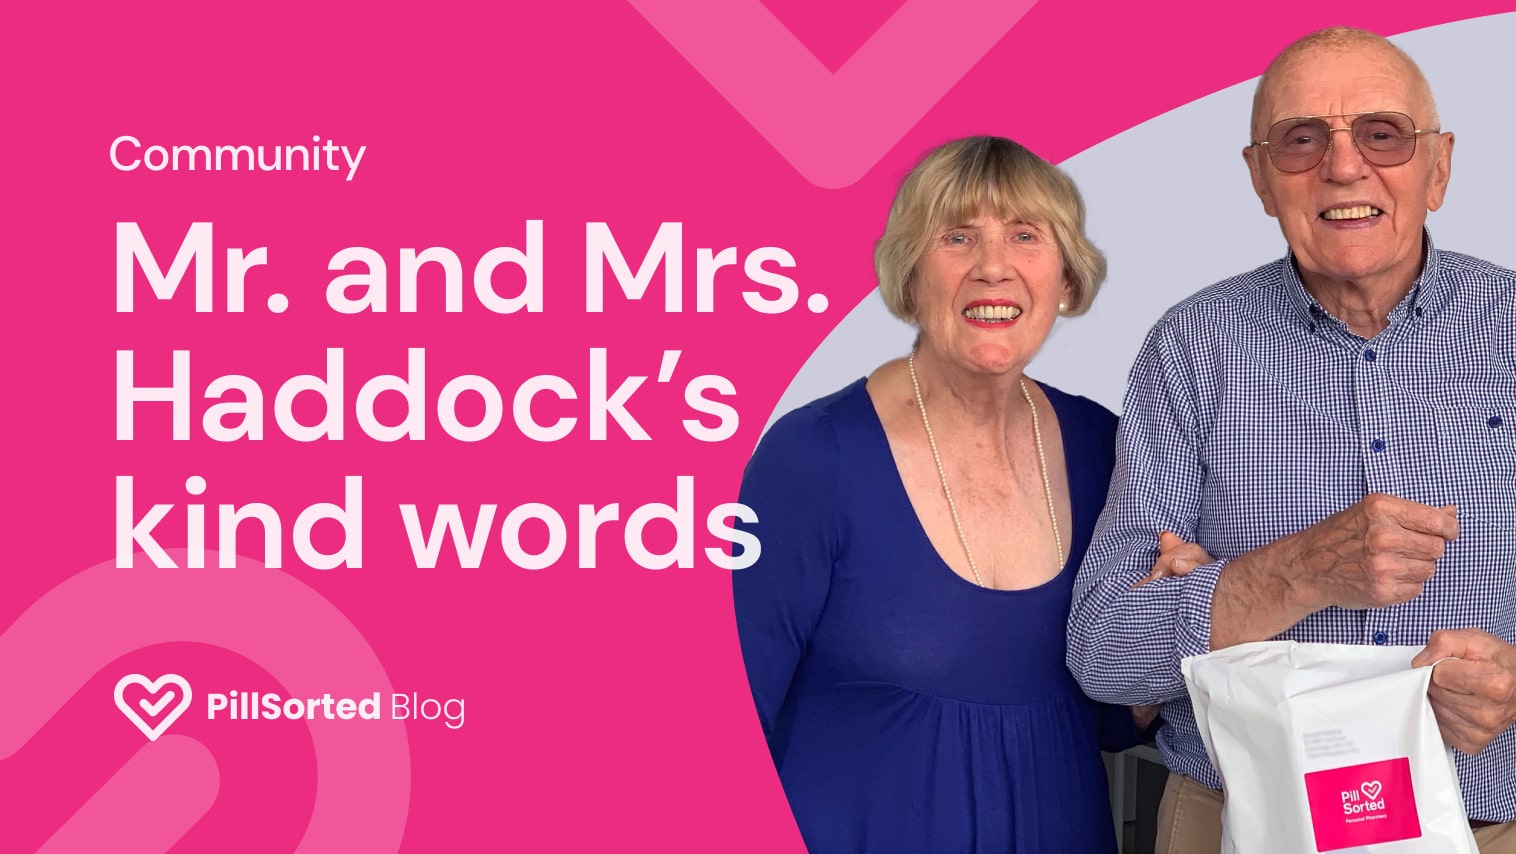 A kind endorsement from Mr. and Mrs. Haddock of Cherry Hinton, CB1